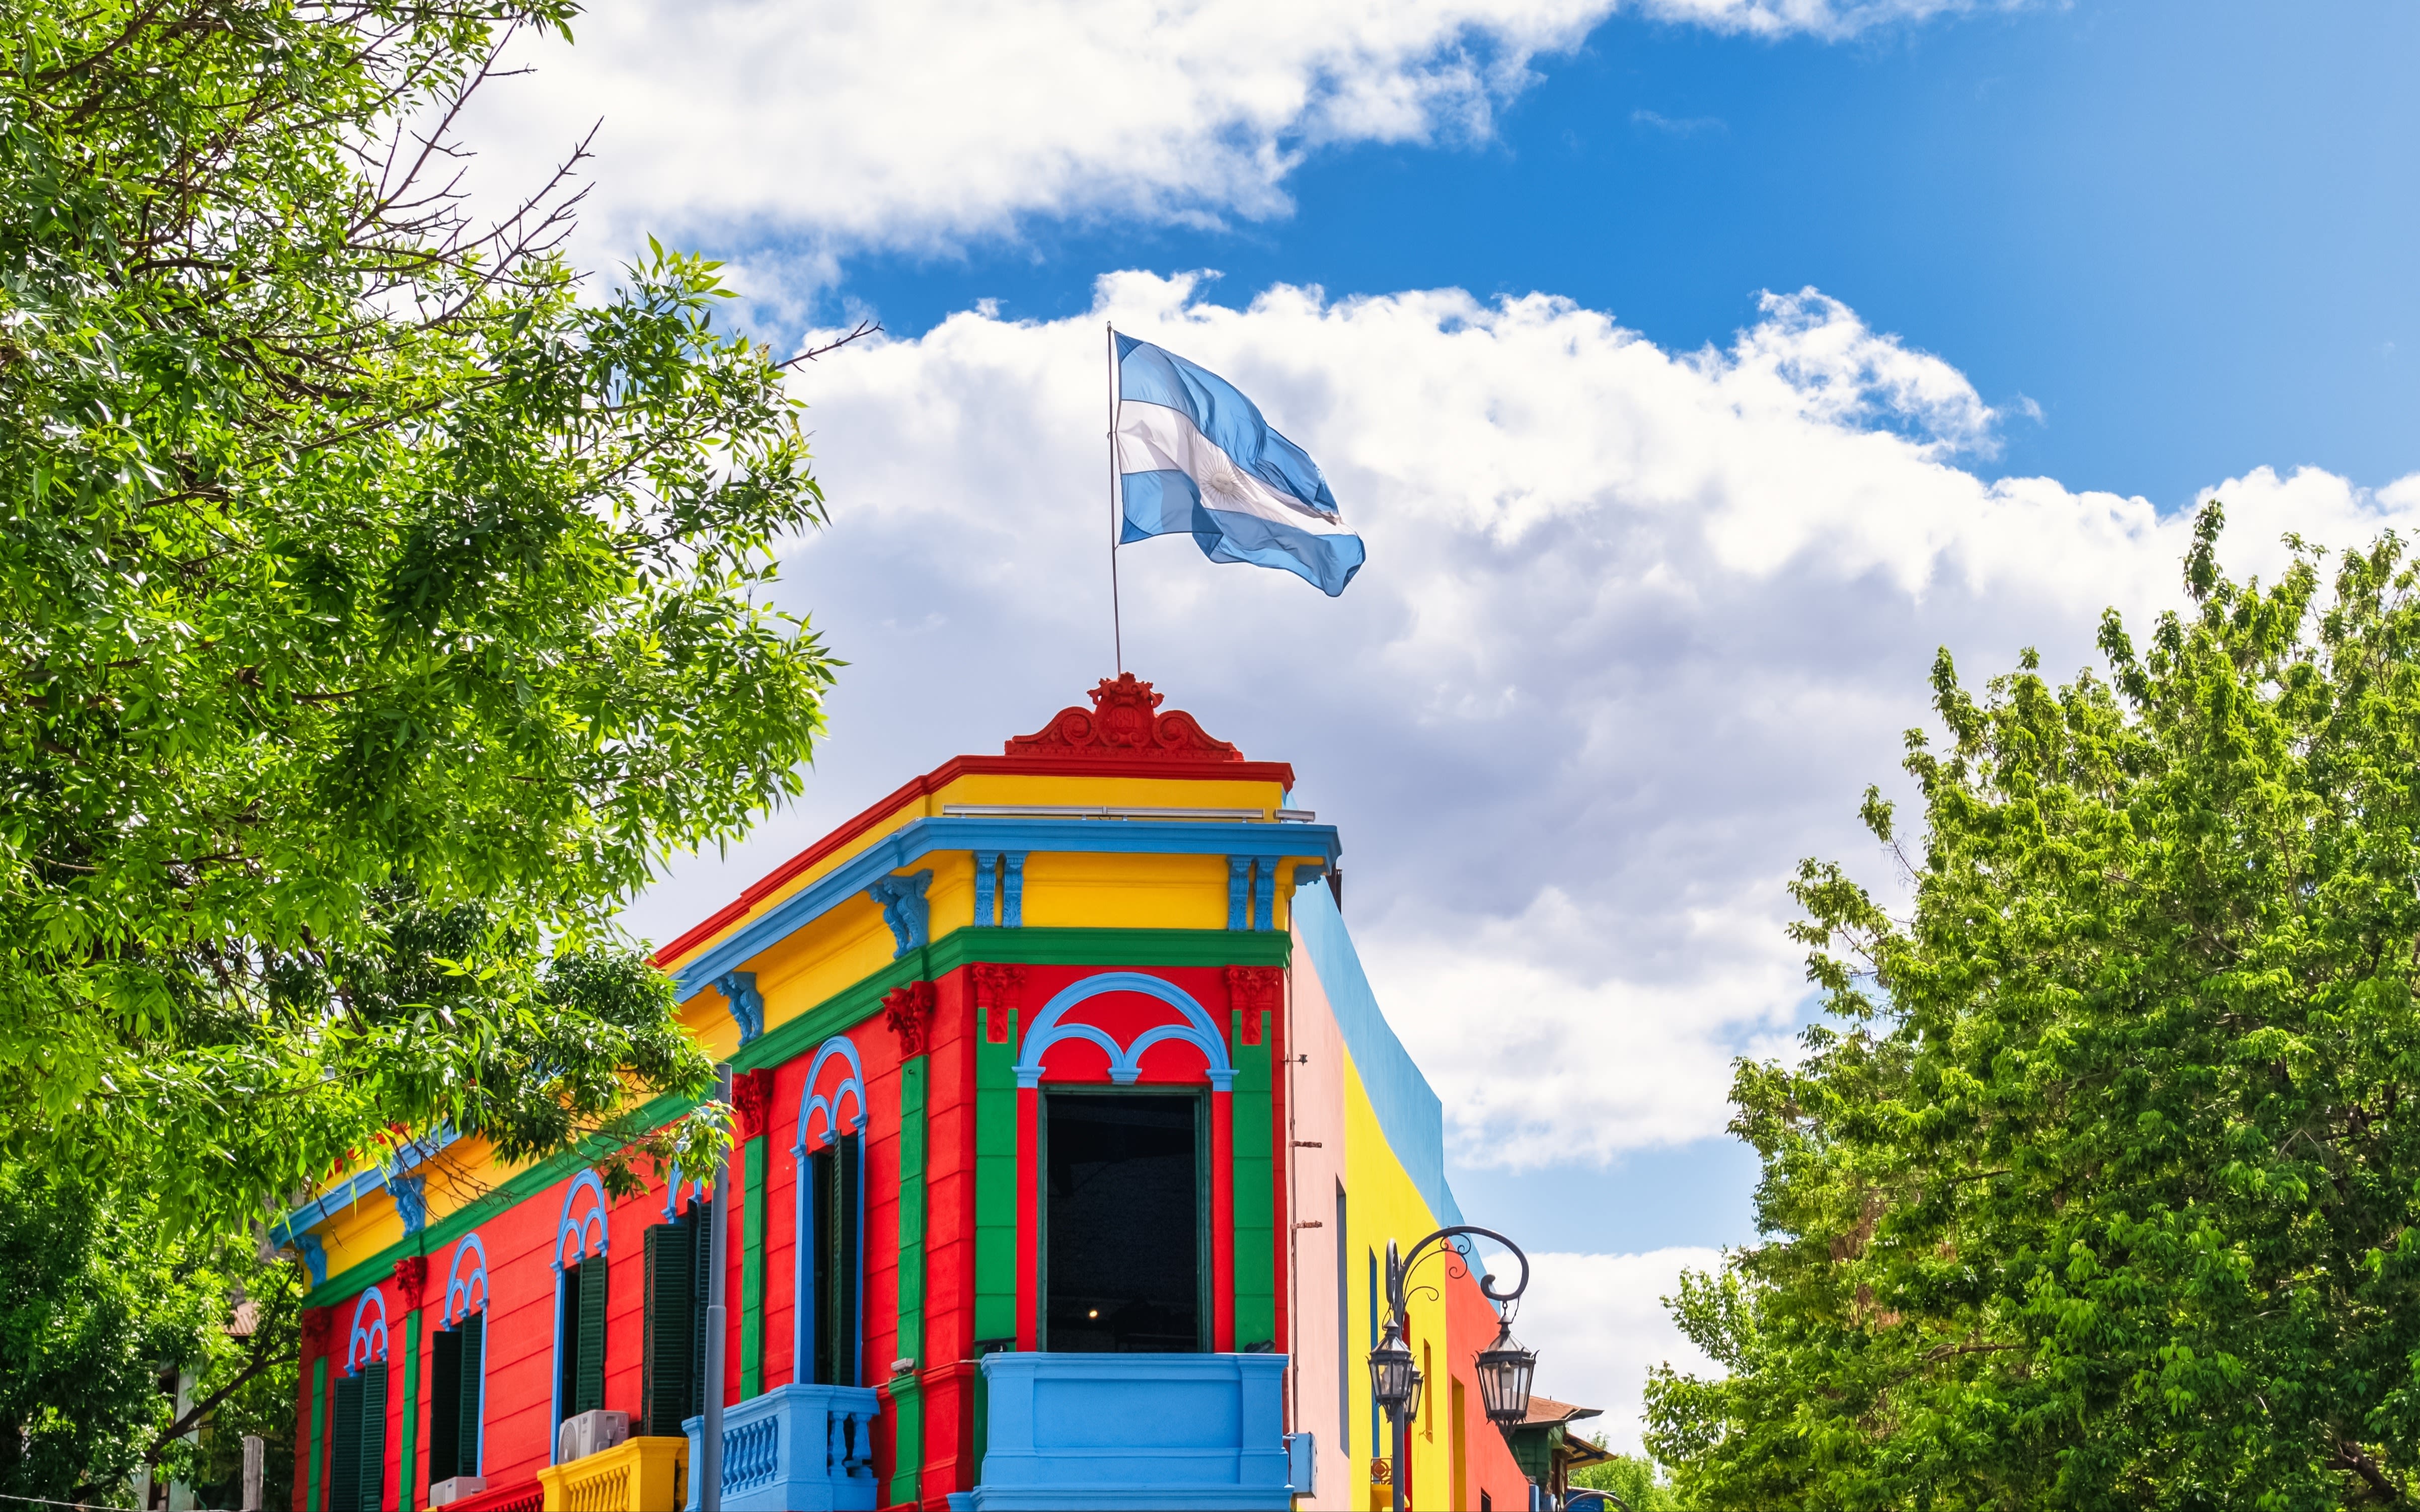 An image of a building flying the Argentinian flag in Buenos Aires